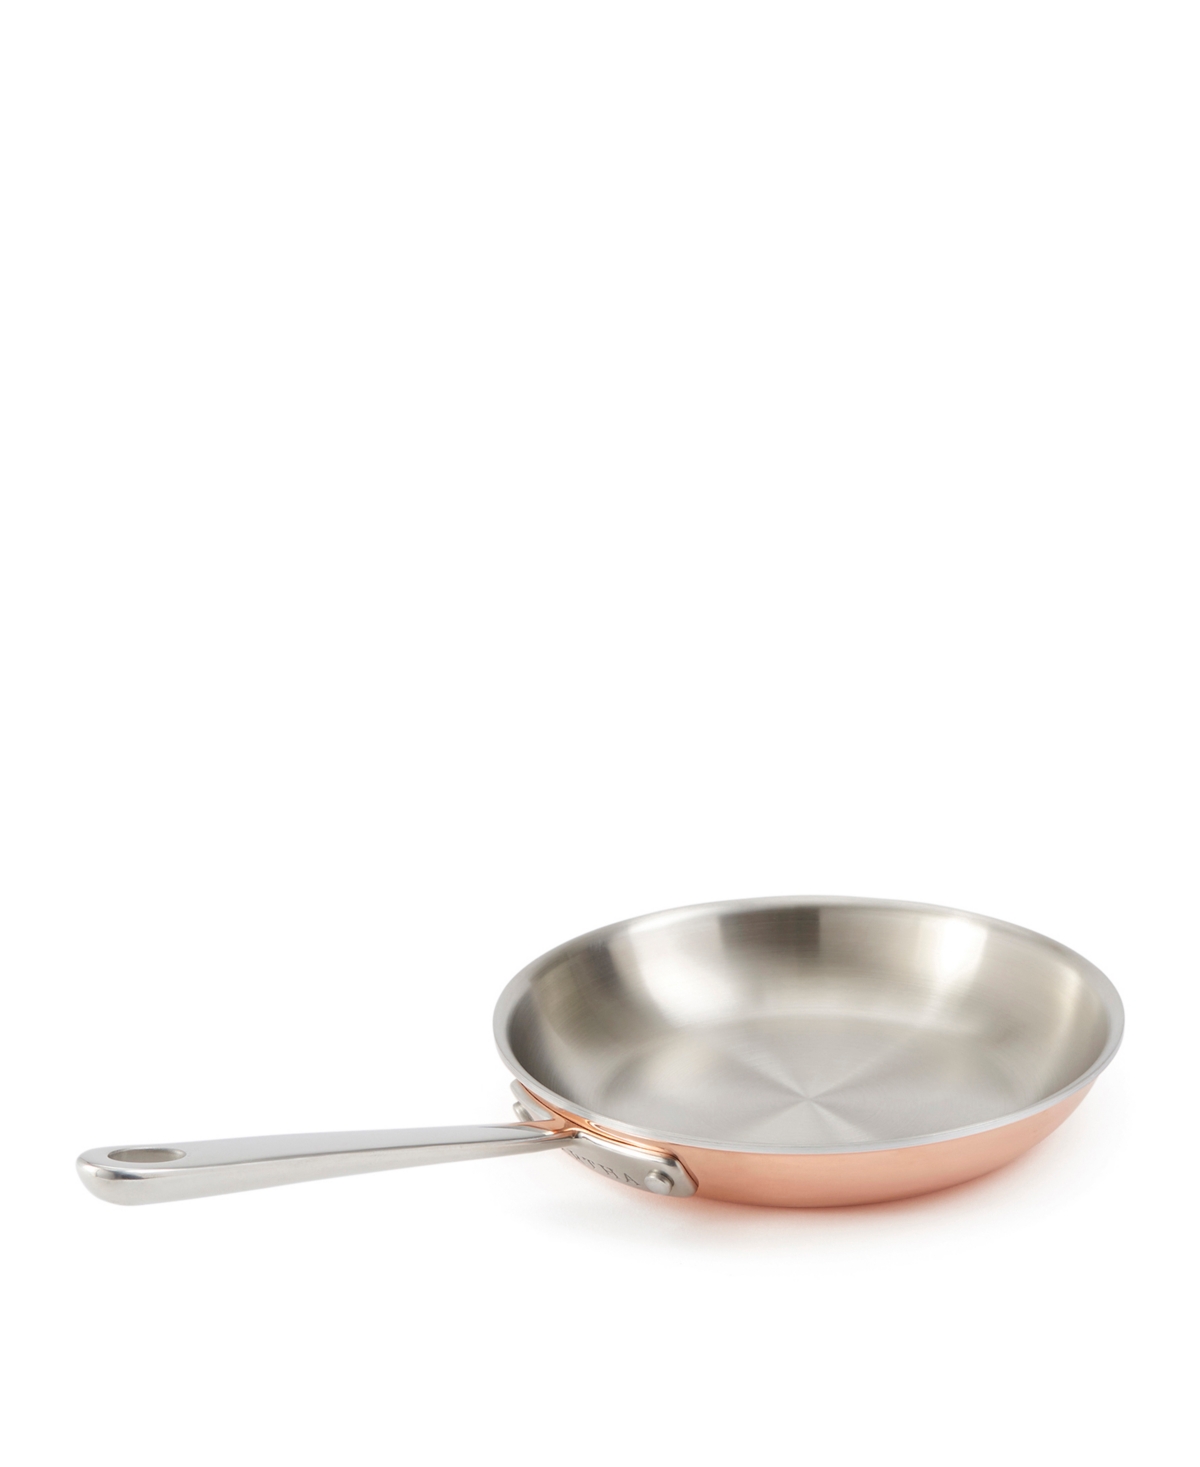 Martha Stewart Collection Stainless Steel 8" Saute Fry Pan In Neutral